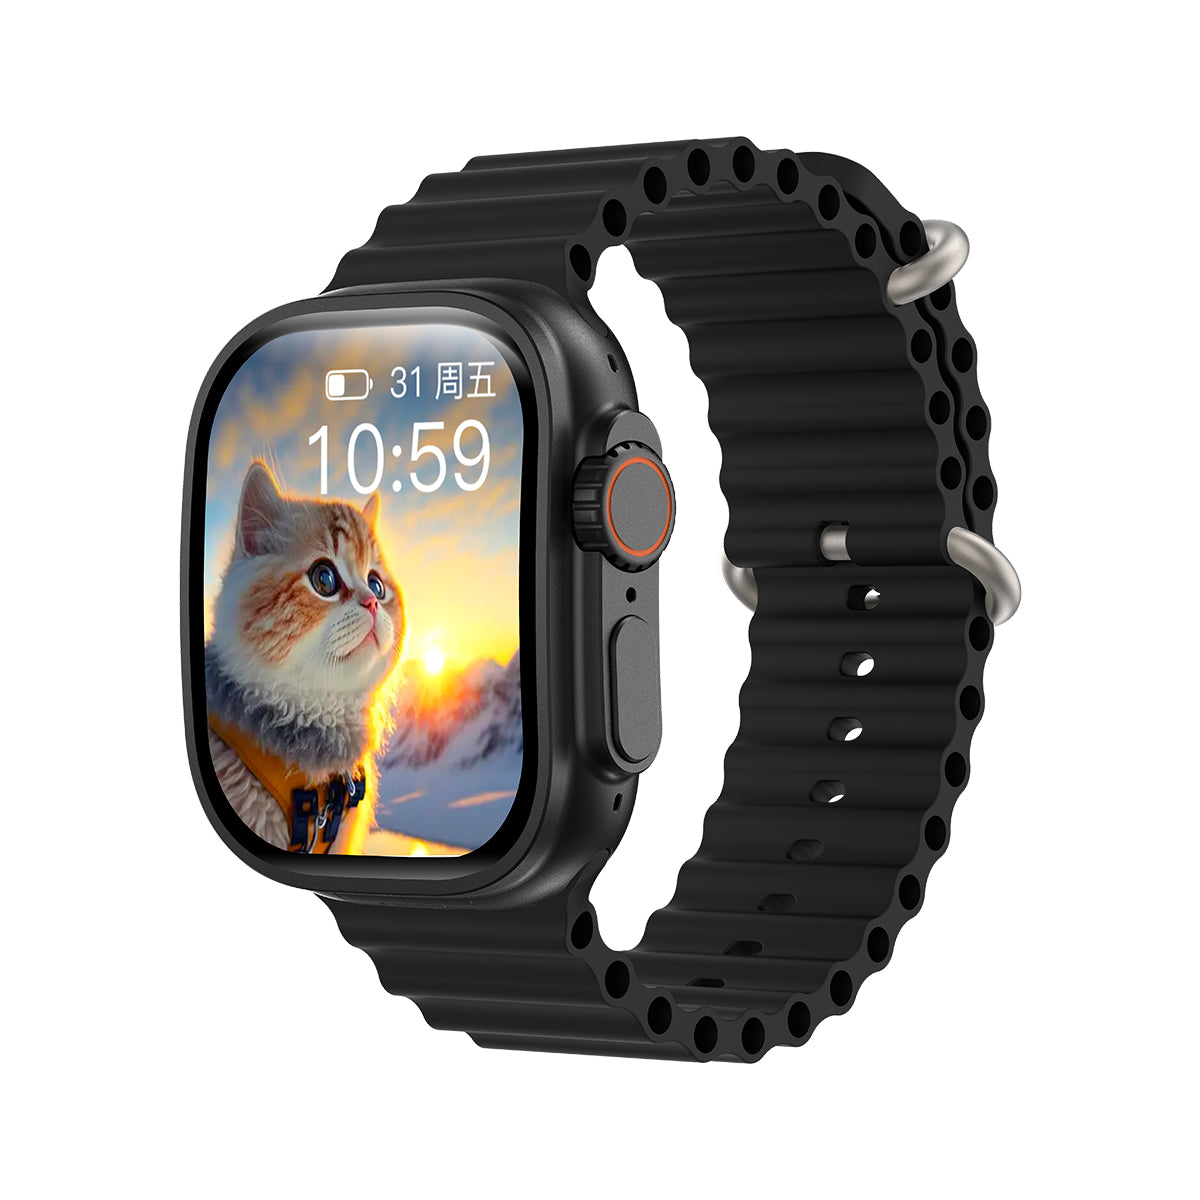 VWAR JC02 Ultra Smart Watch AMOLED Curved Screen Android System 2GB+32GB 4G WIFI GPS Camera